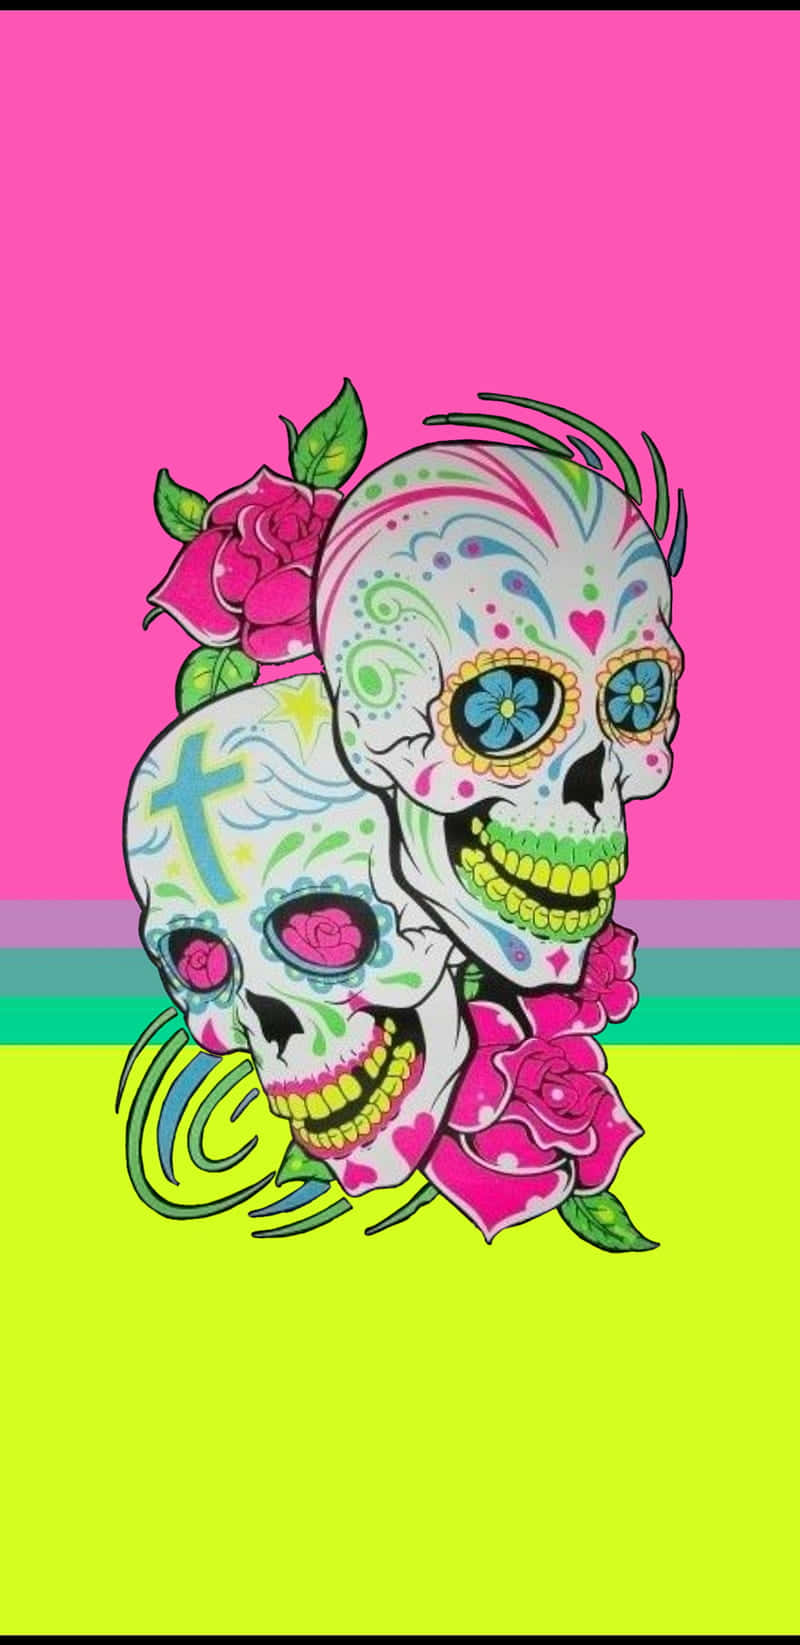 Two Sugar Skulls On A Pink And Green Background Wallpaper